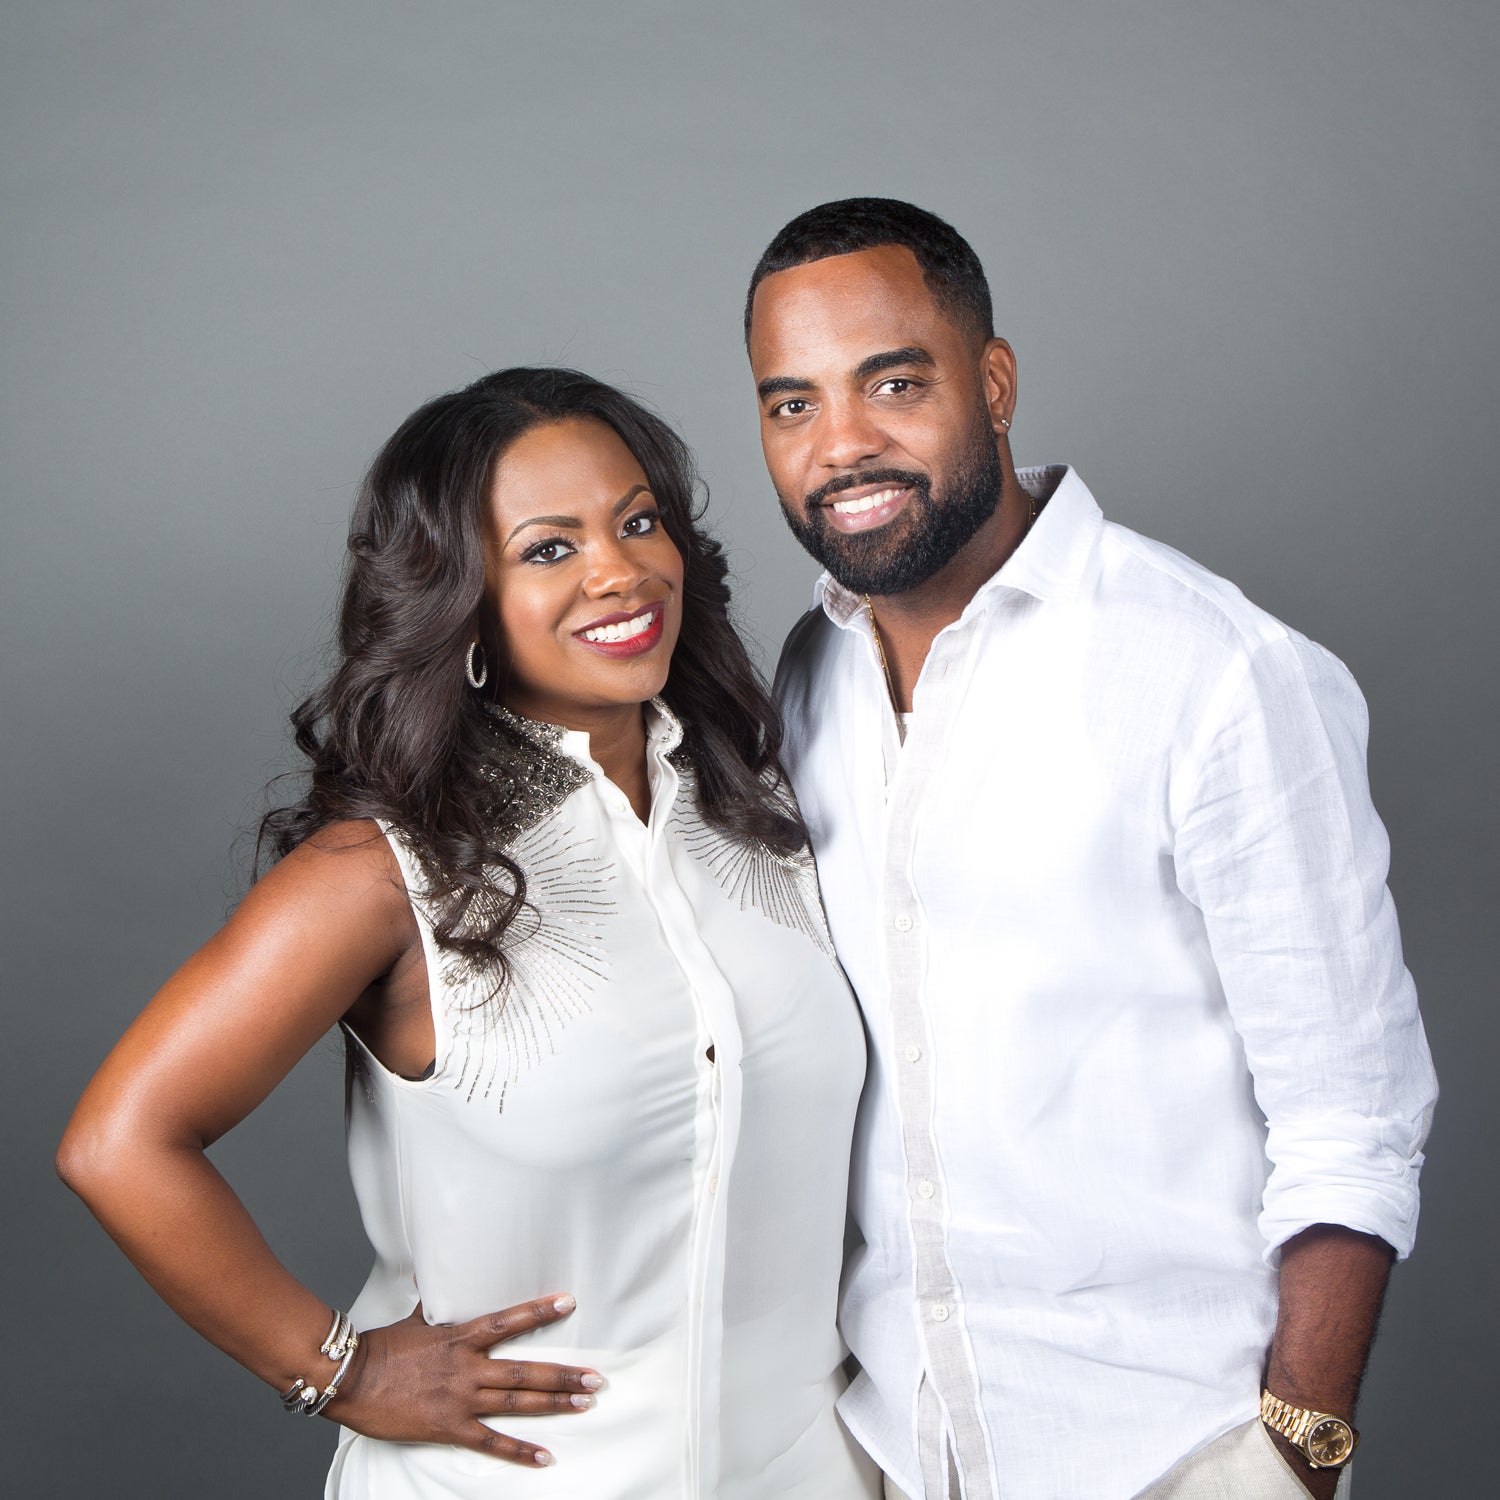 Kandi Burruss Denies Pregnancy Rumors, Reveals She's 'Trying To Figure Out  Ways To Grow Our Family